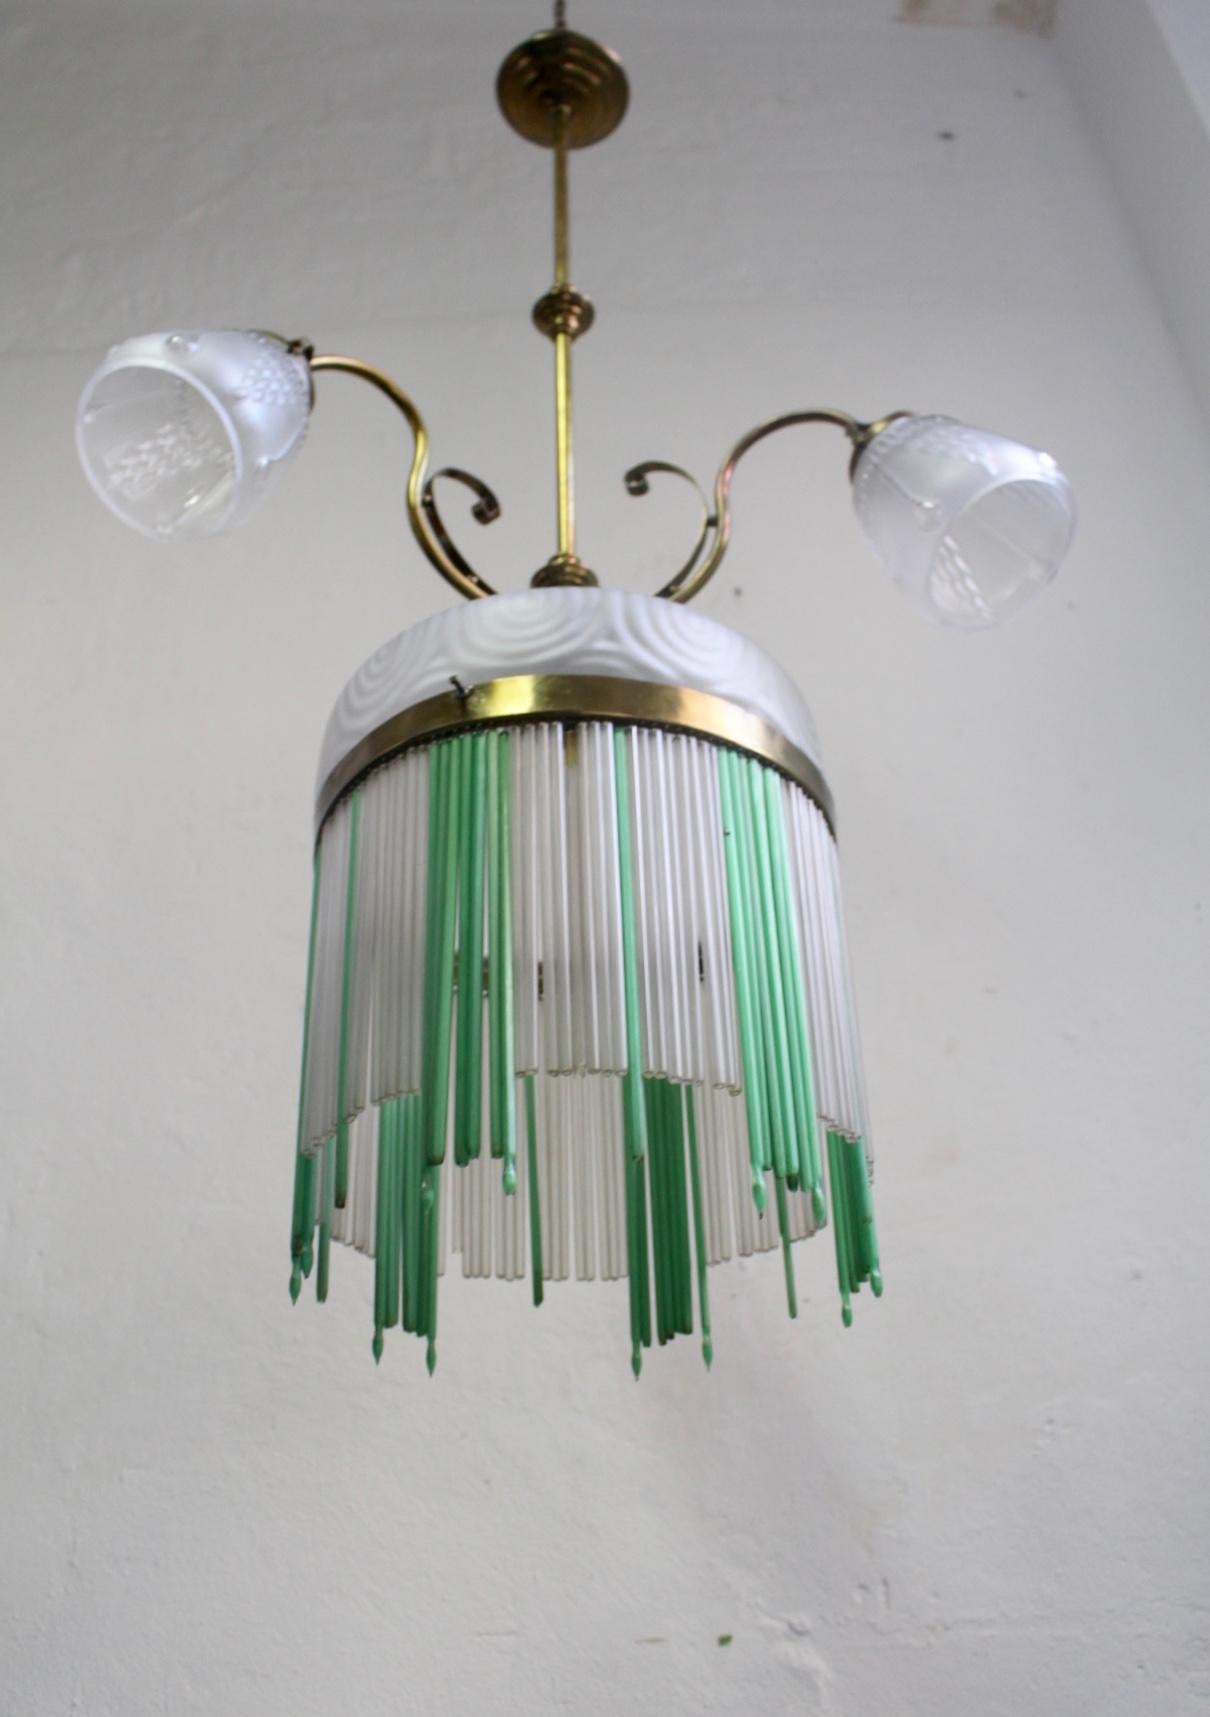 Art Nouveau 4-lights chandelier with brass structure, frosted carved glass and glass pendant sticks hanging from the center brass ring.
Good Vintage Condition. Some Pendant sticks featuring some minor wear.